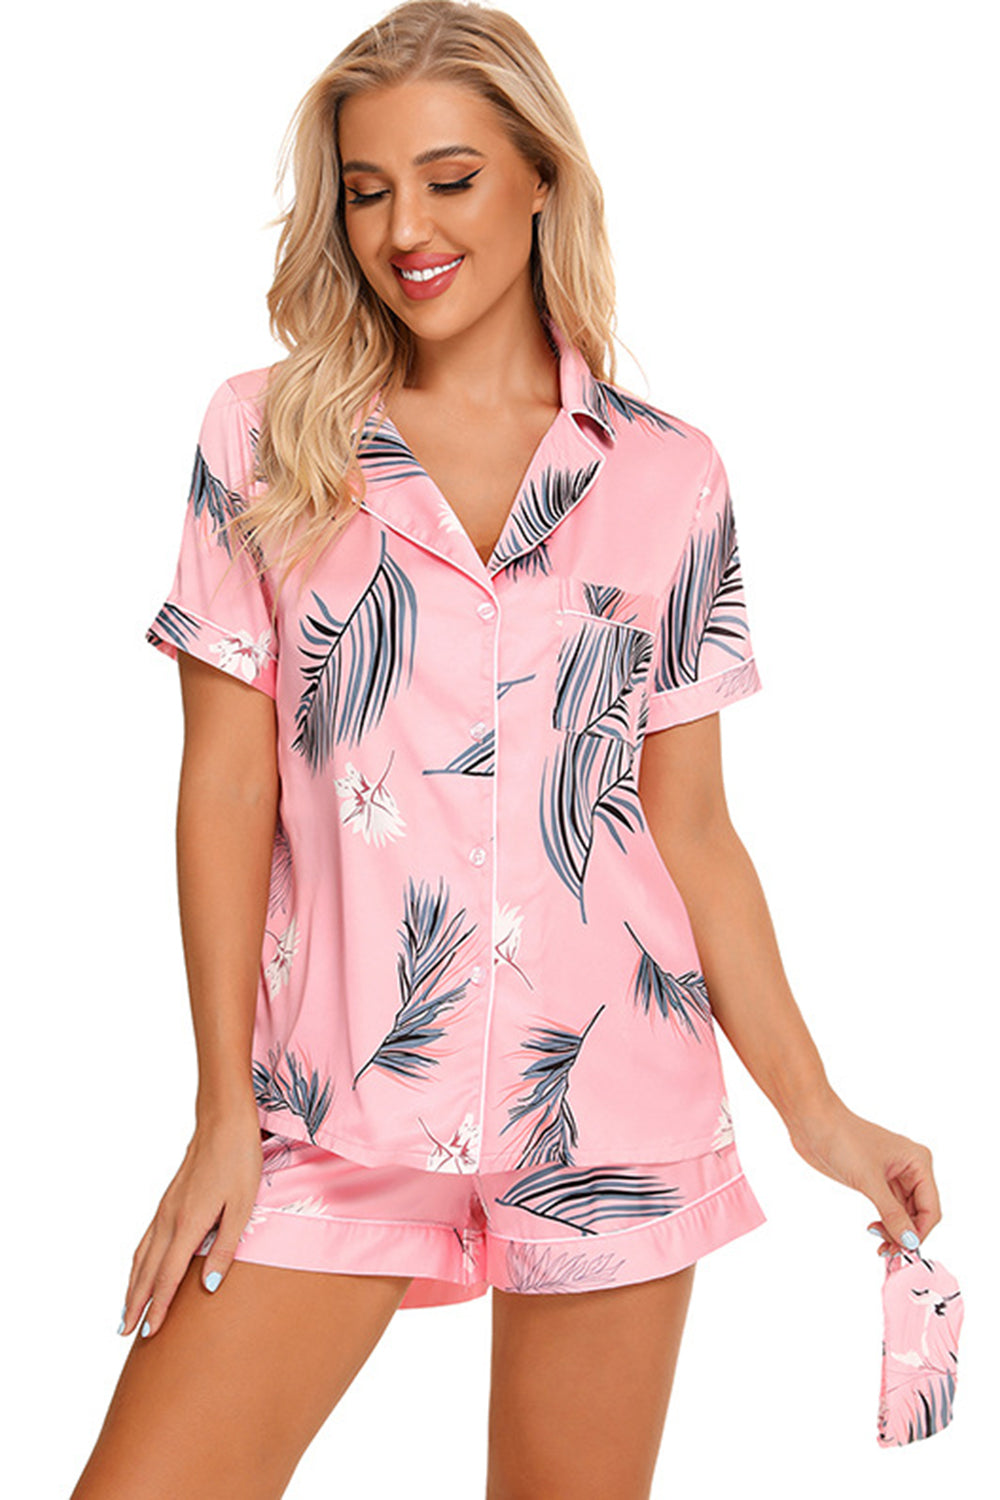 Printed Button Up Short Sleeve Top and Shorts Lounge Set - House of Binx 